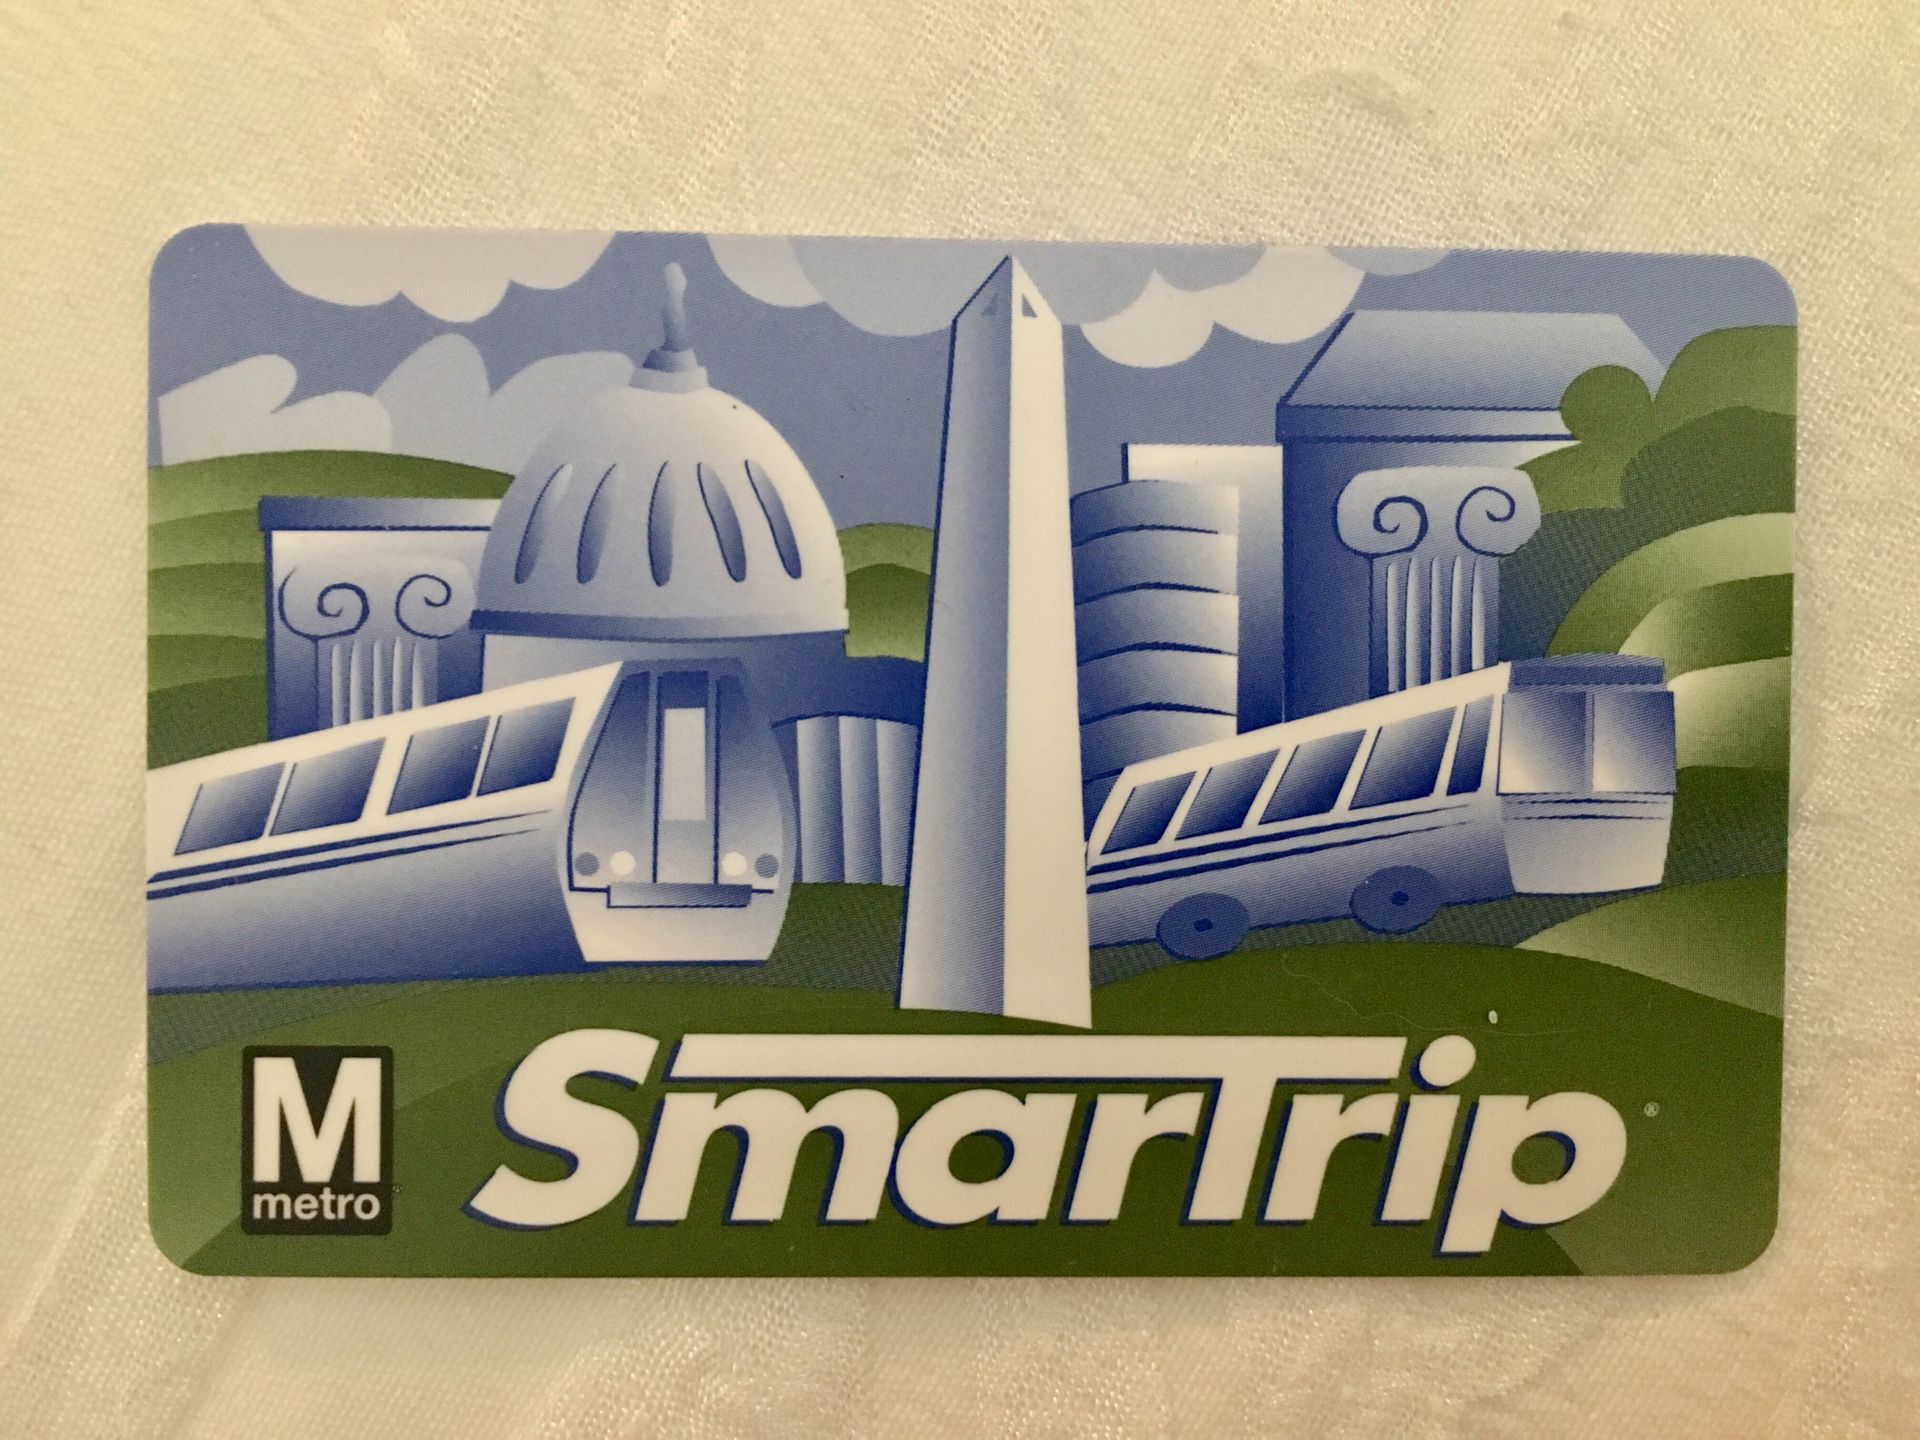 SmarTrip card for sale $262. Asking $100.